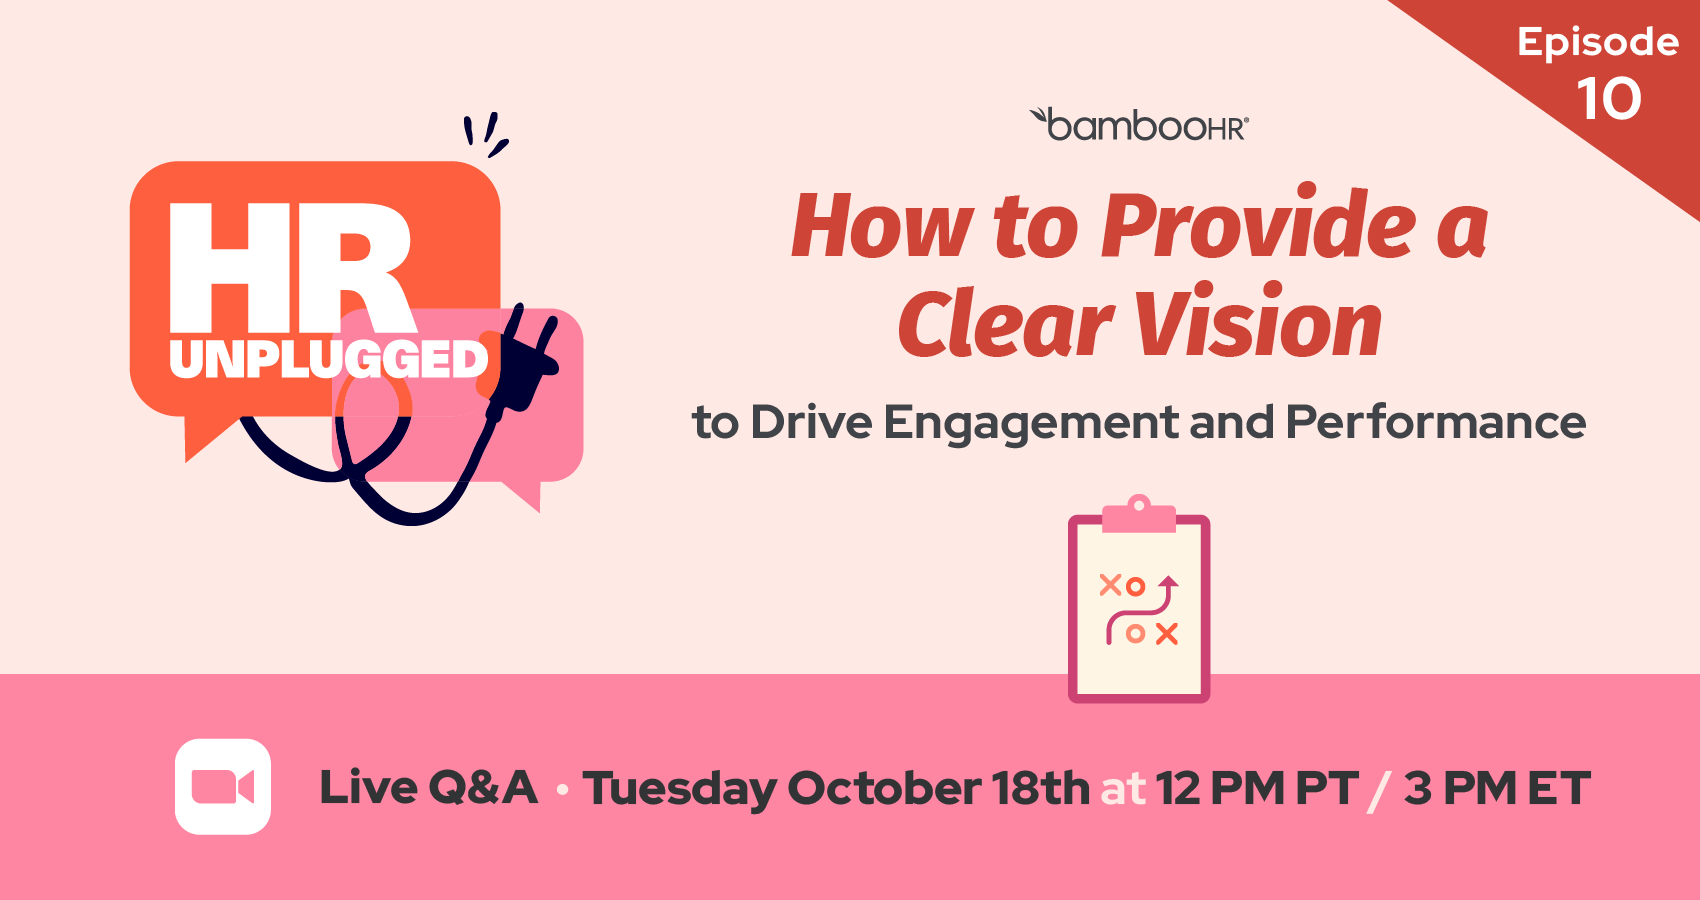 Episode 10: How to Provide a Clear Vision to Drive Engagement and Performance